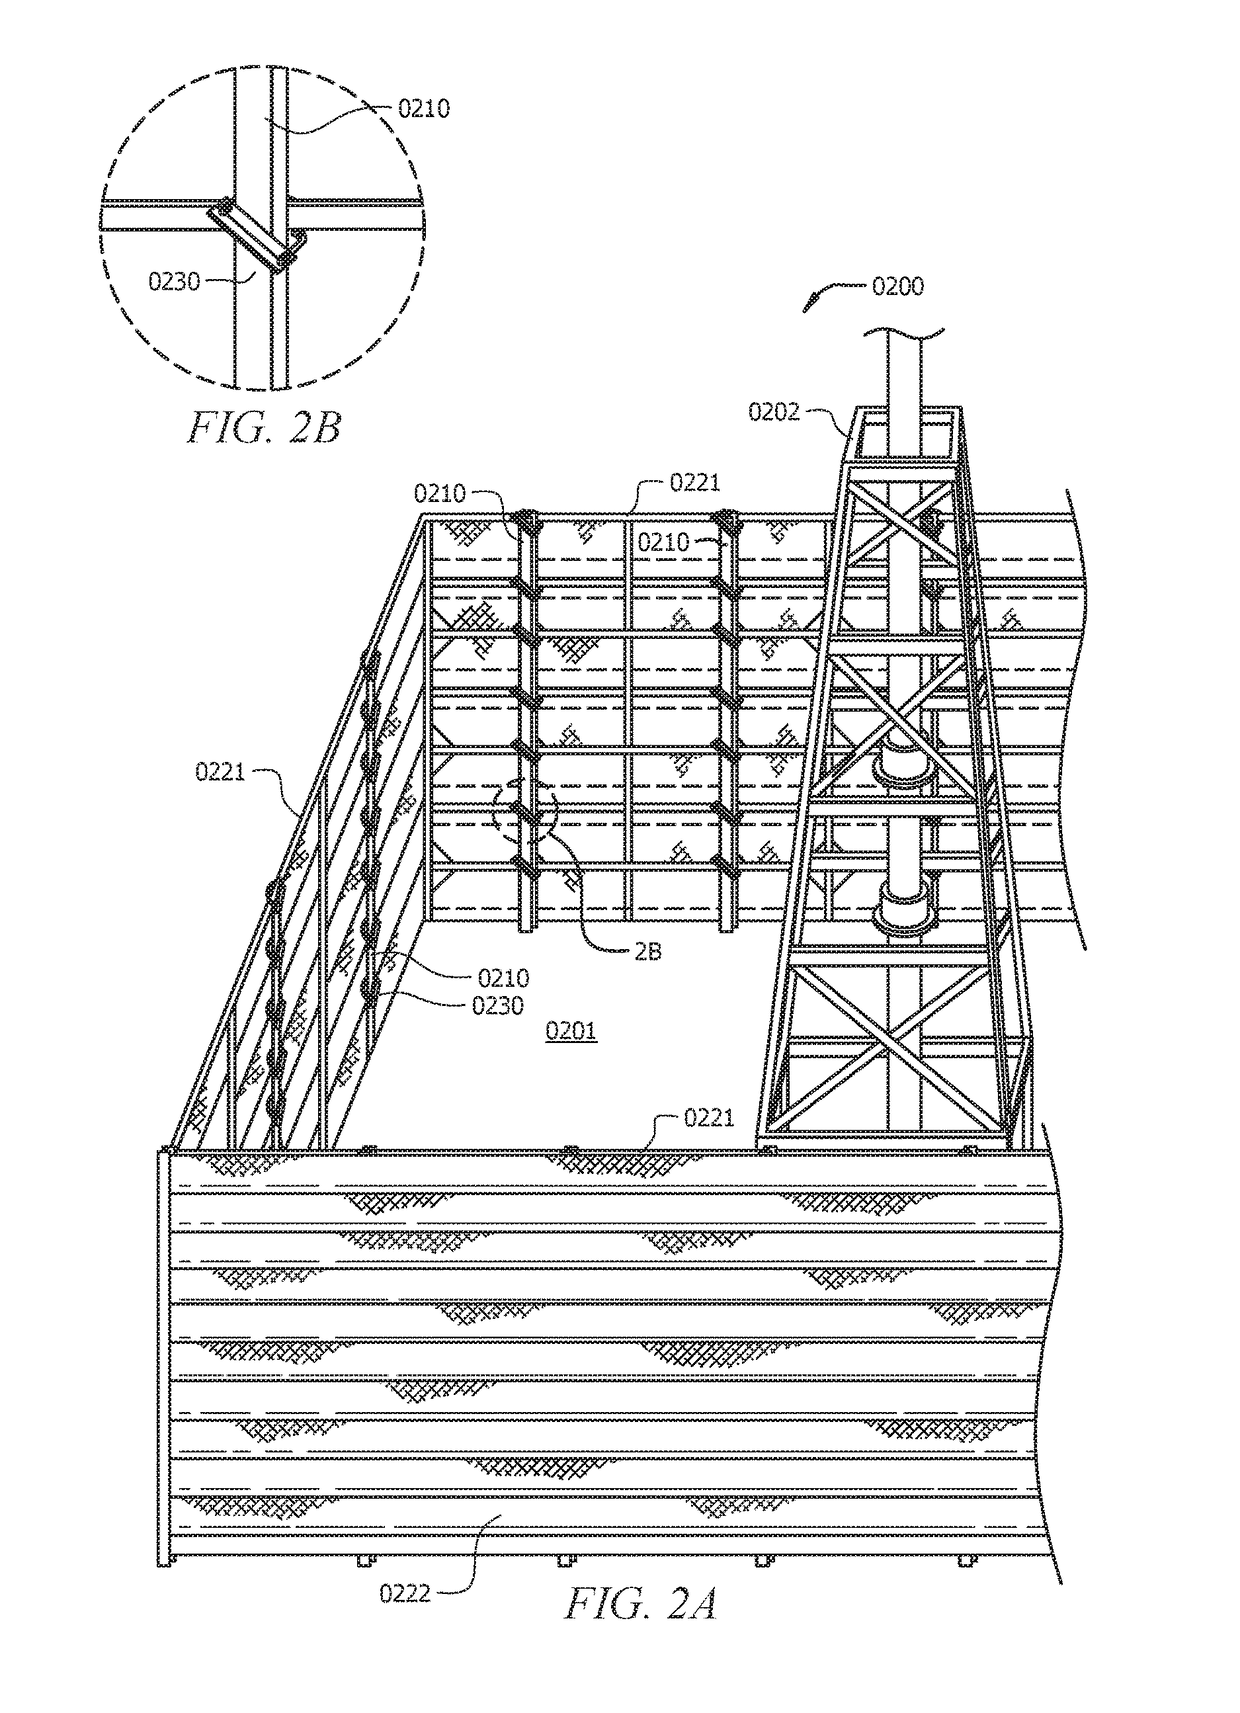 Sound abatement system and method